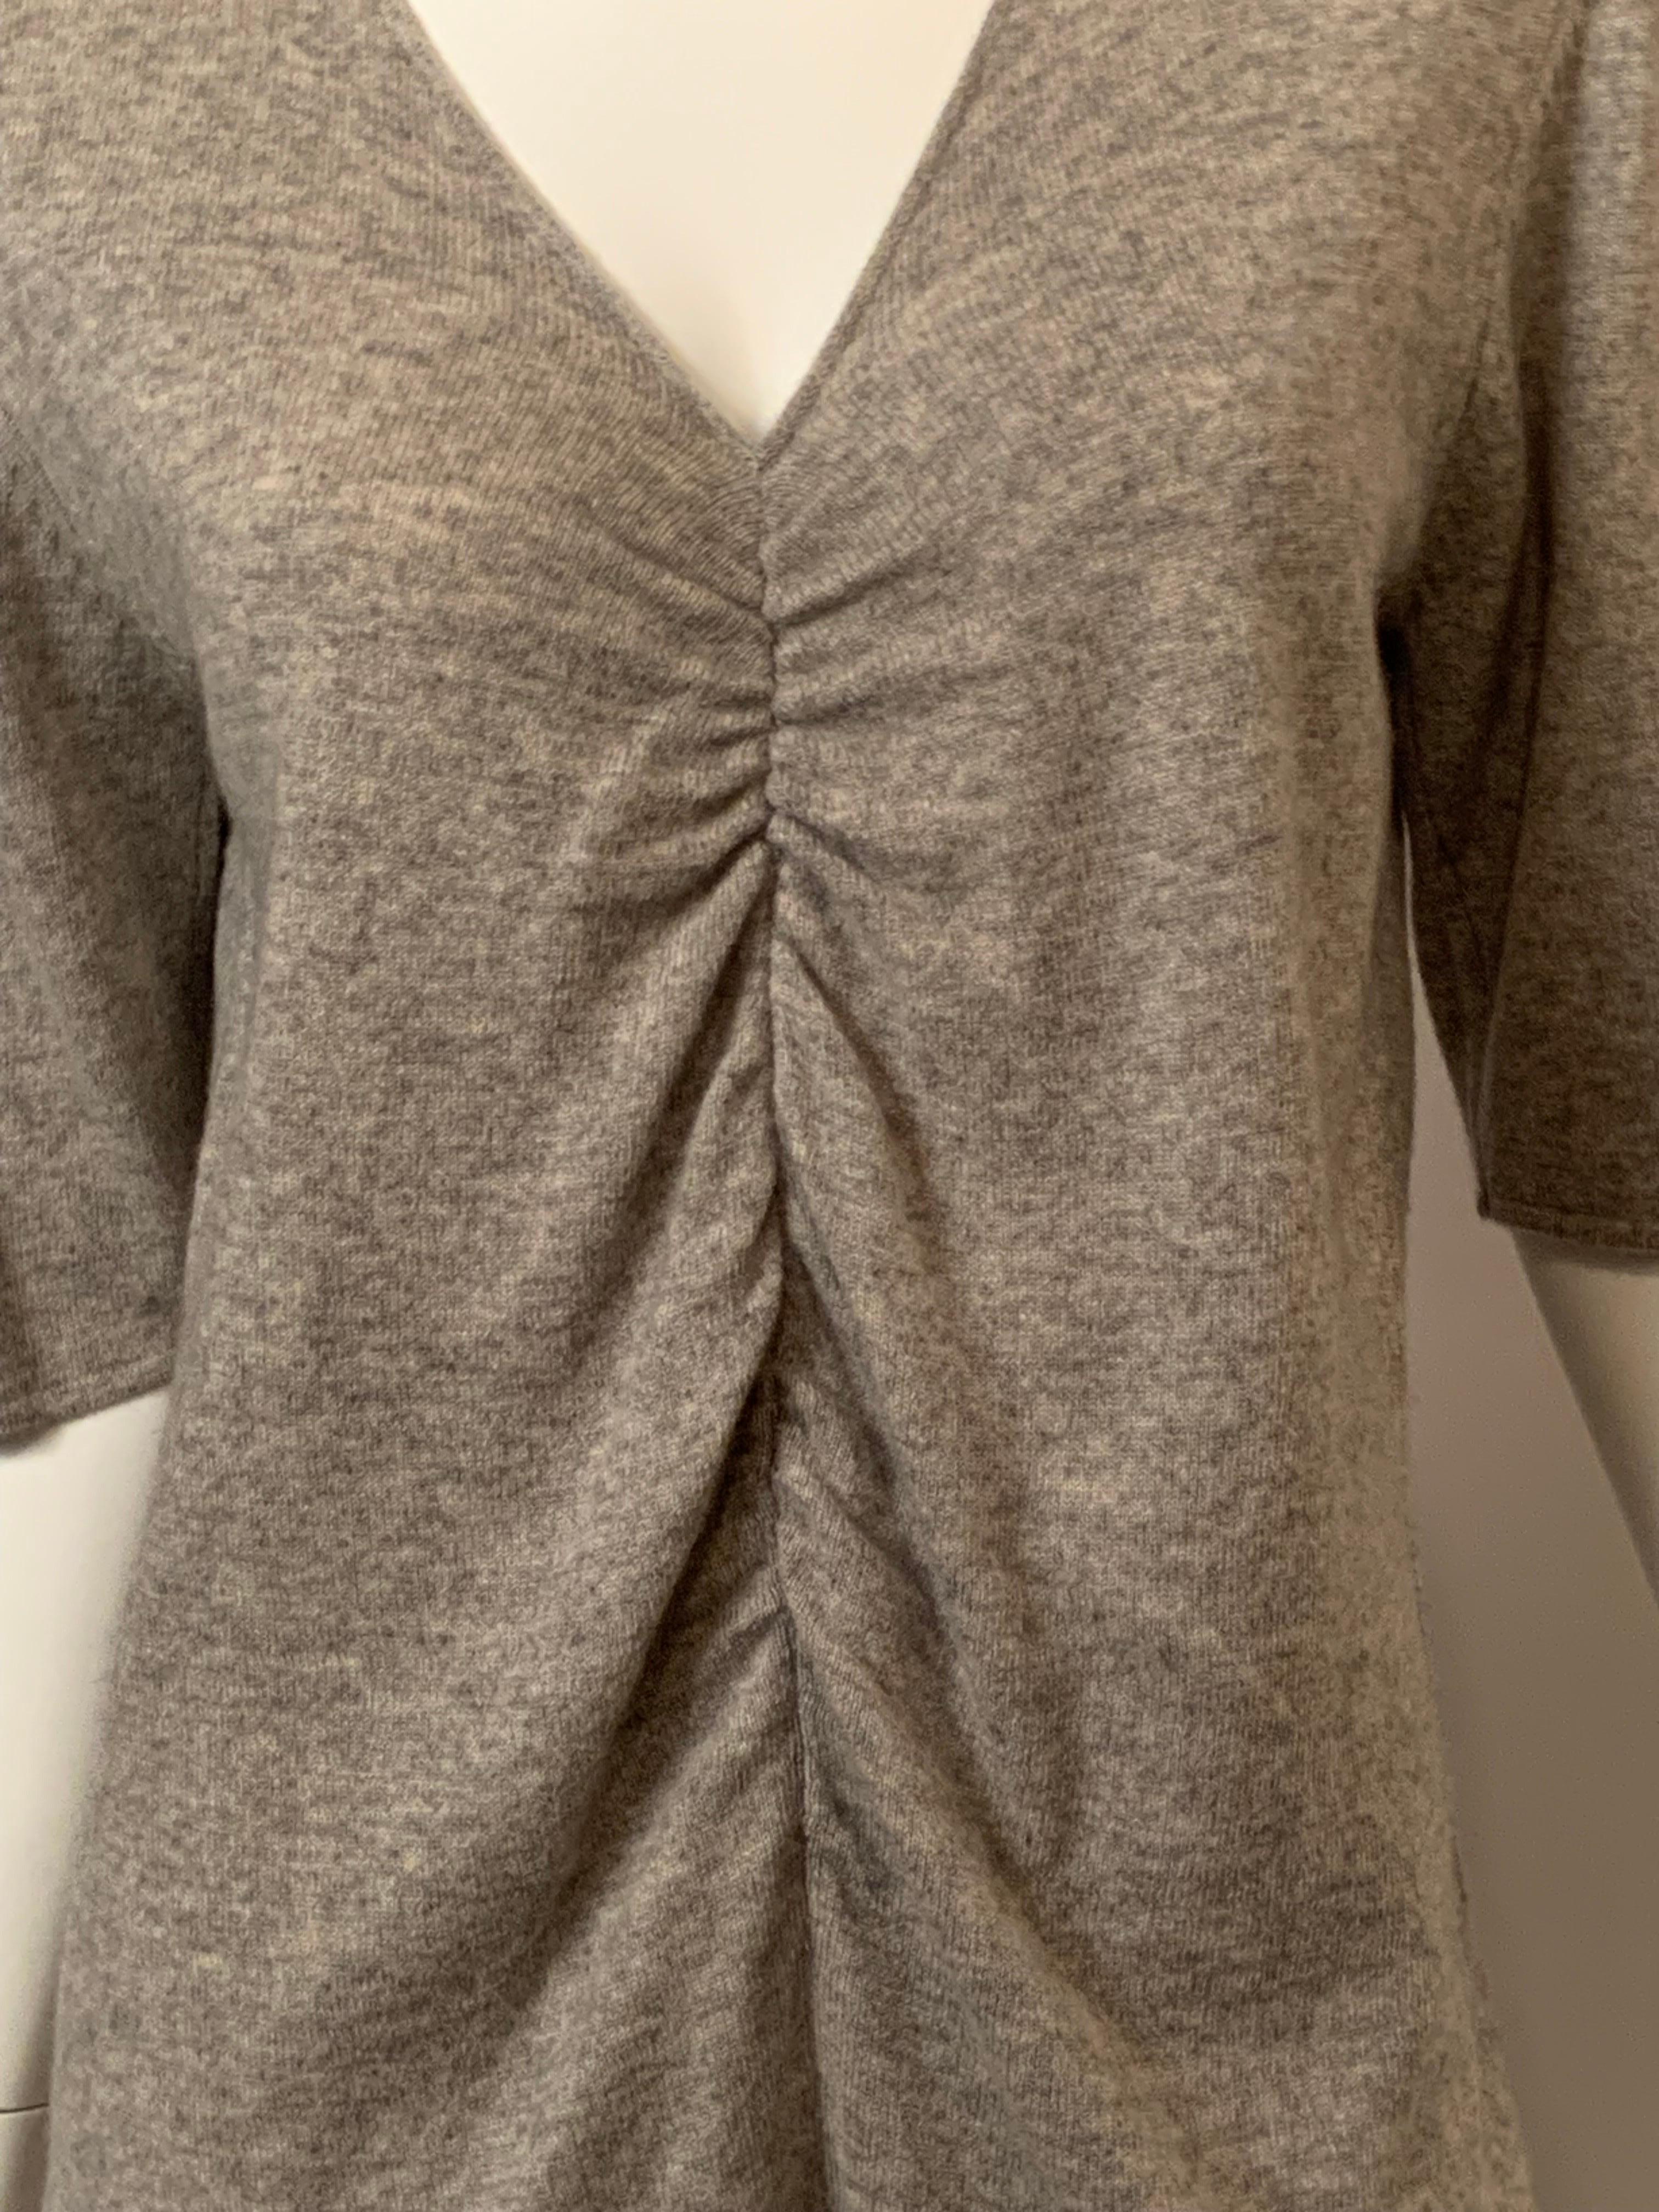 Giorgio Armani designed this heather grey cashmere sweater in the 1980's.  With the ease of a T shirt t has a V neckline, gathering at the center front, and elbow length sleeves.  All of the original tags are still attached.  It is in excellent